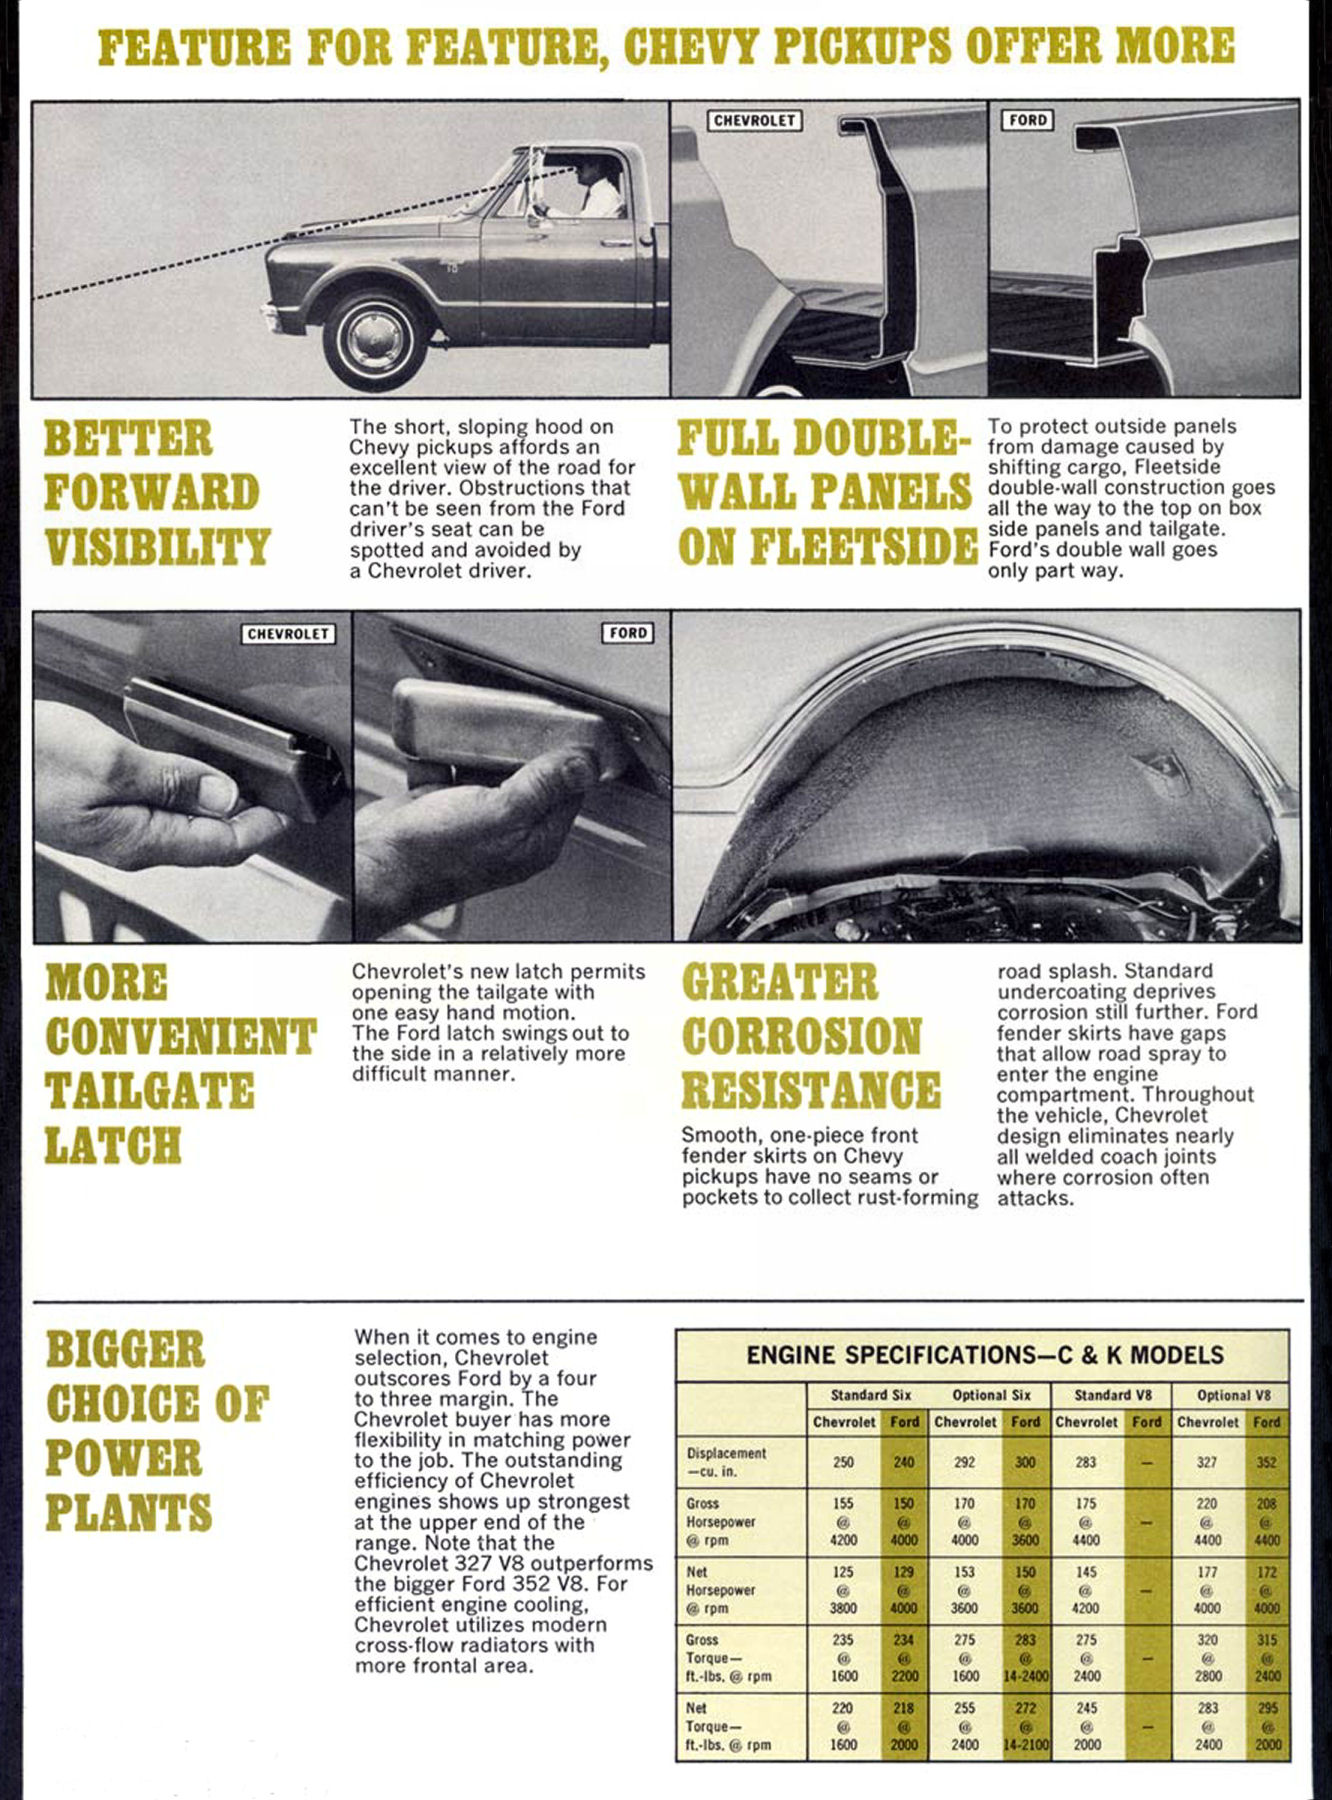 1967 Chevrolet vs Ford Trucks Competitive Facts-04